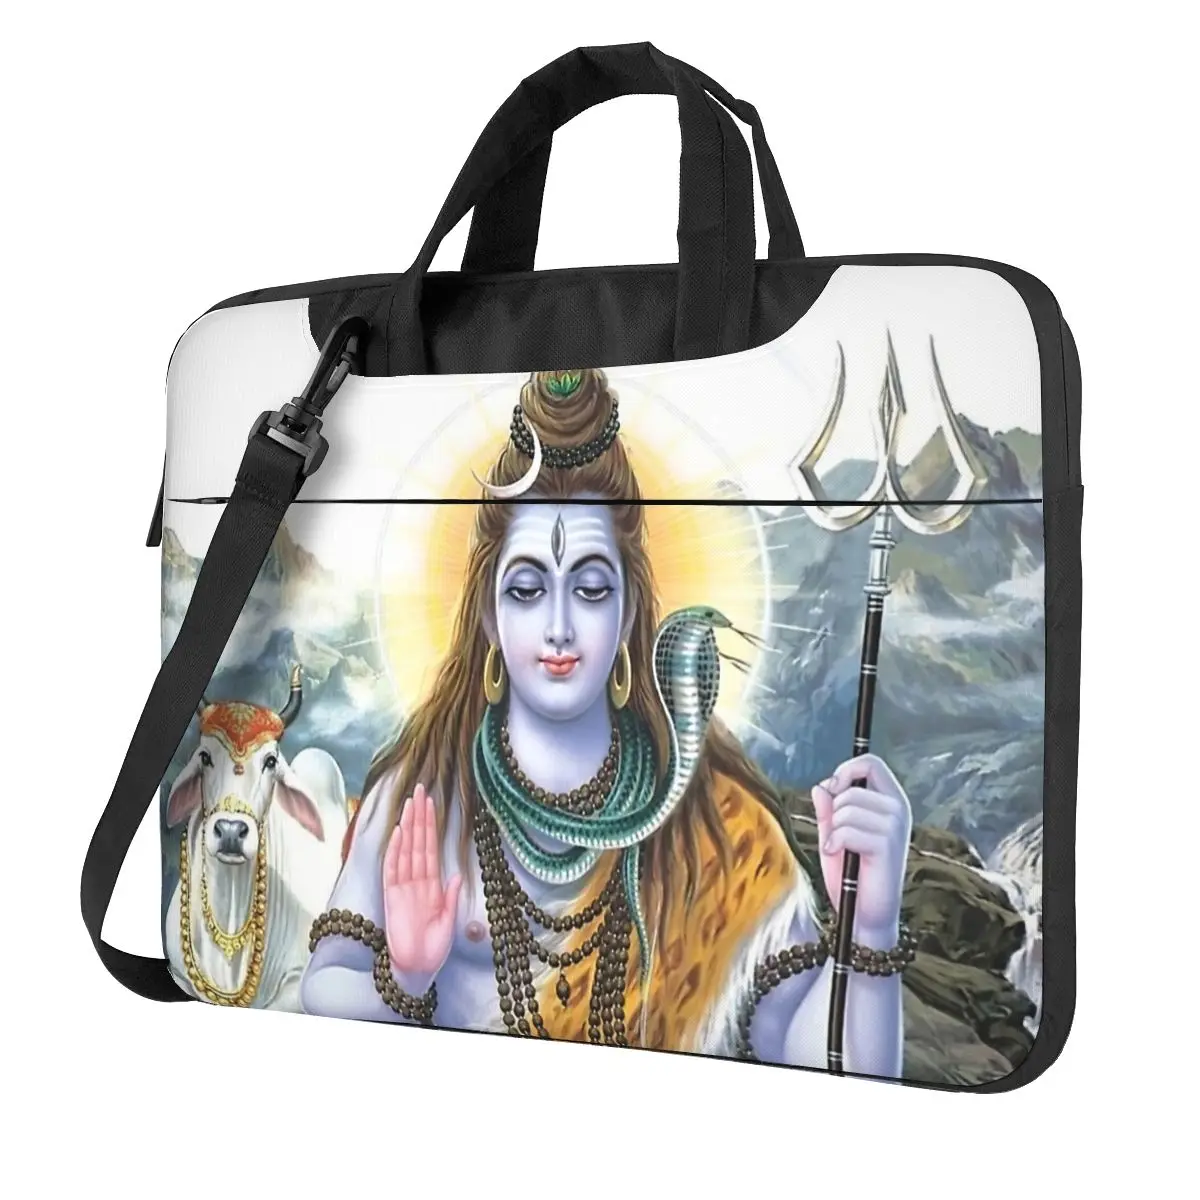 Lord Shiva International – Manufacturers and Exporters of Finest Quality  Equestrian Accessories, Bags and Workwear